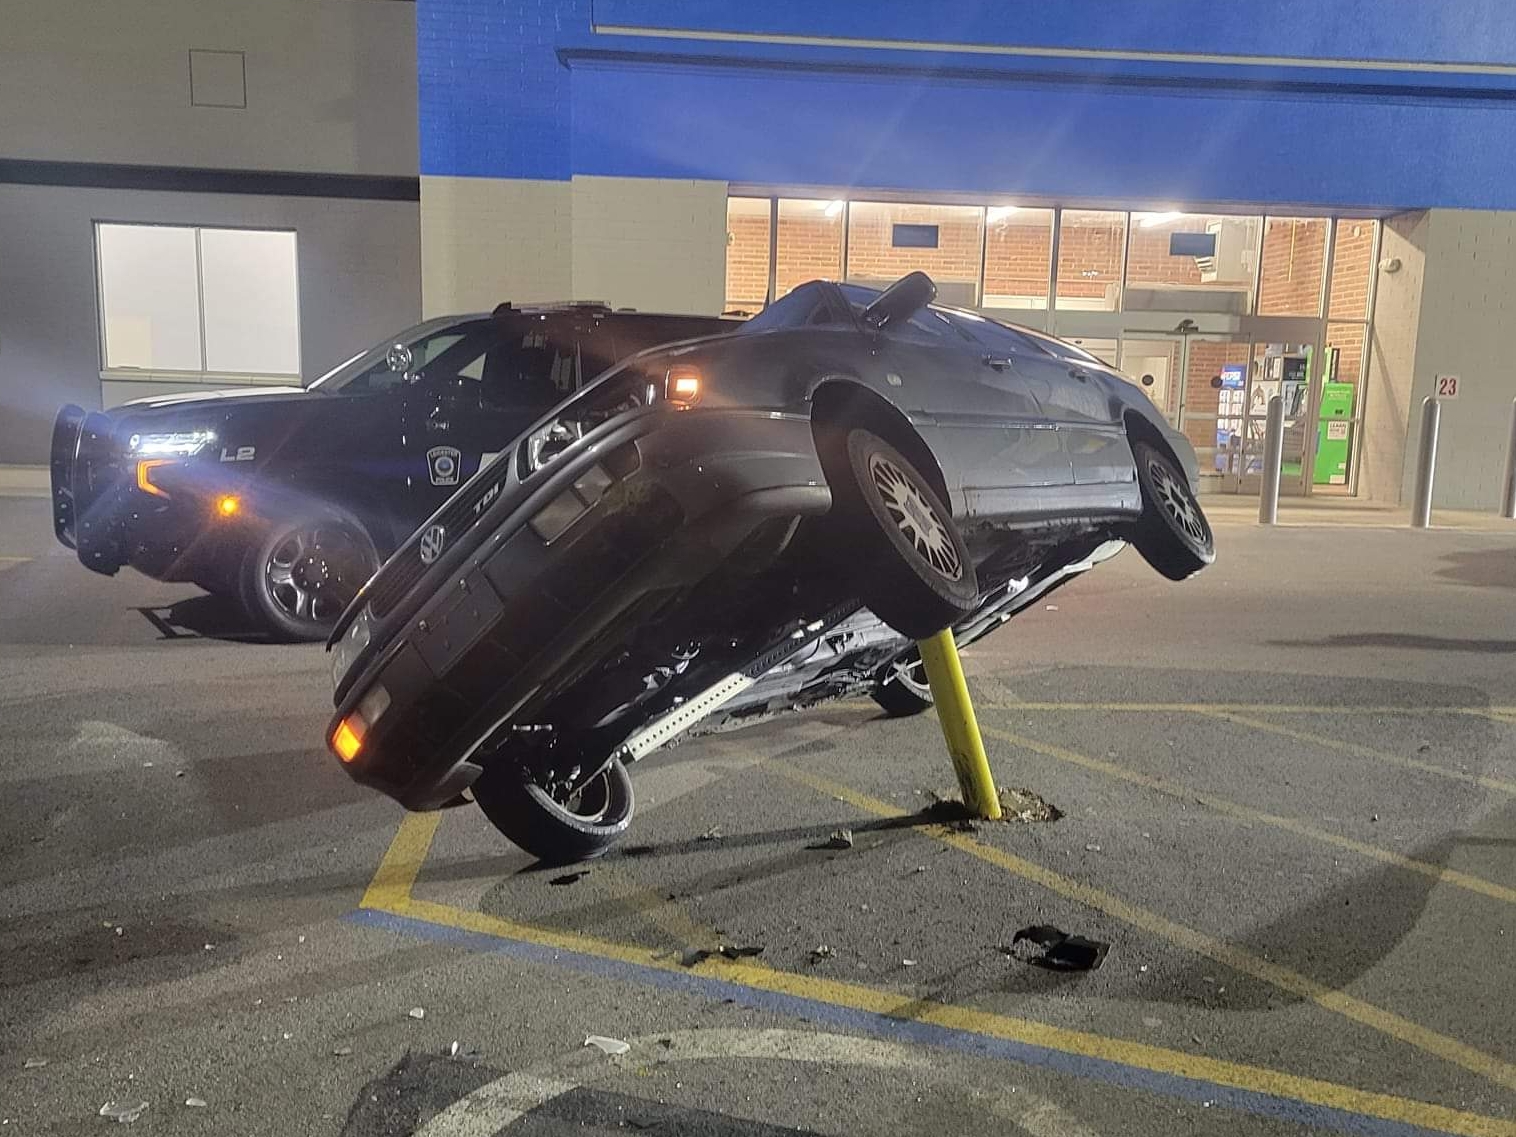 Car found impaled in Walmart Supercenter parking lot in Leicester 